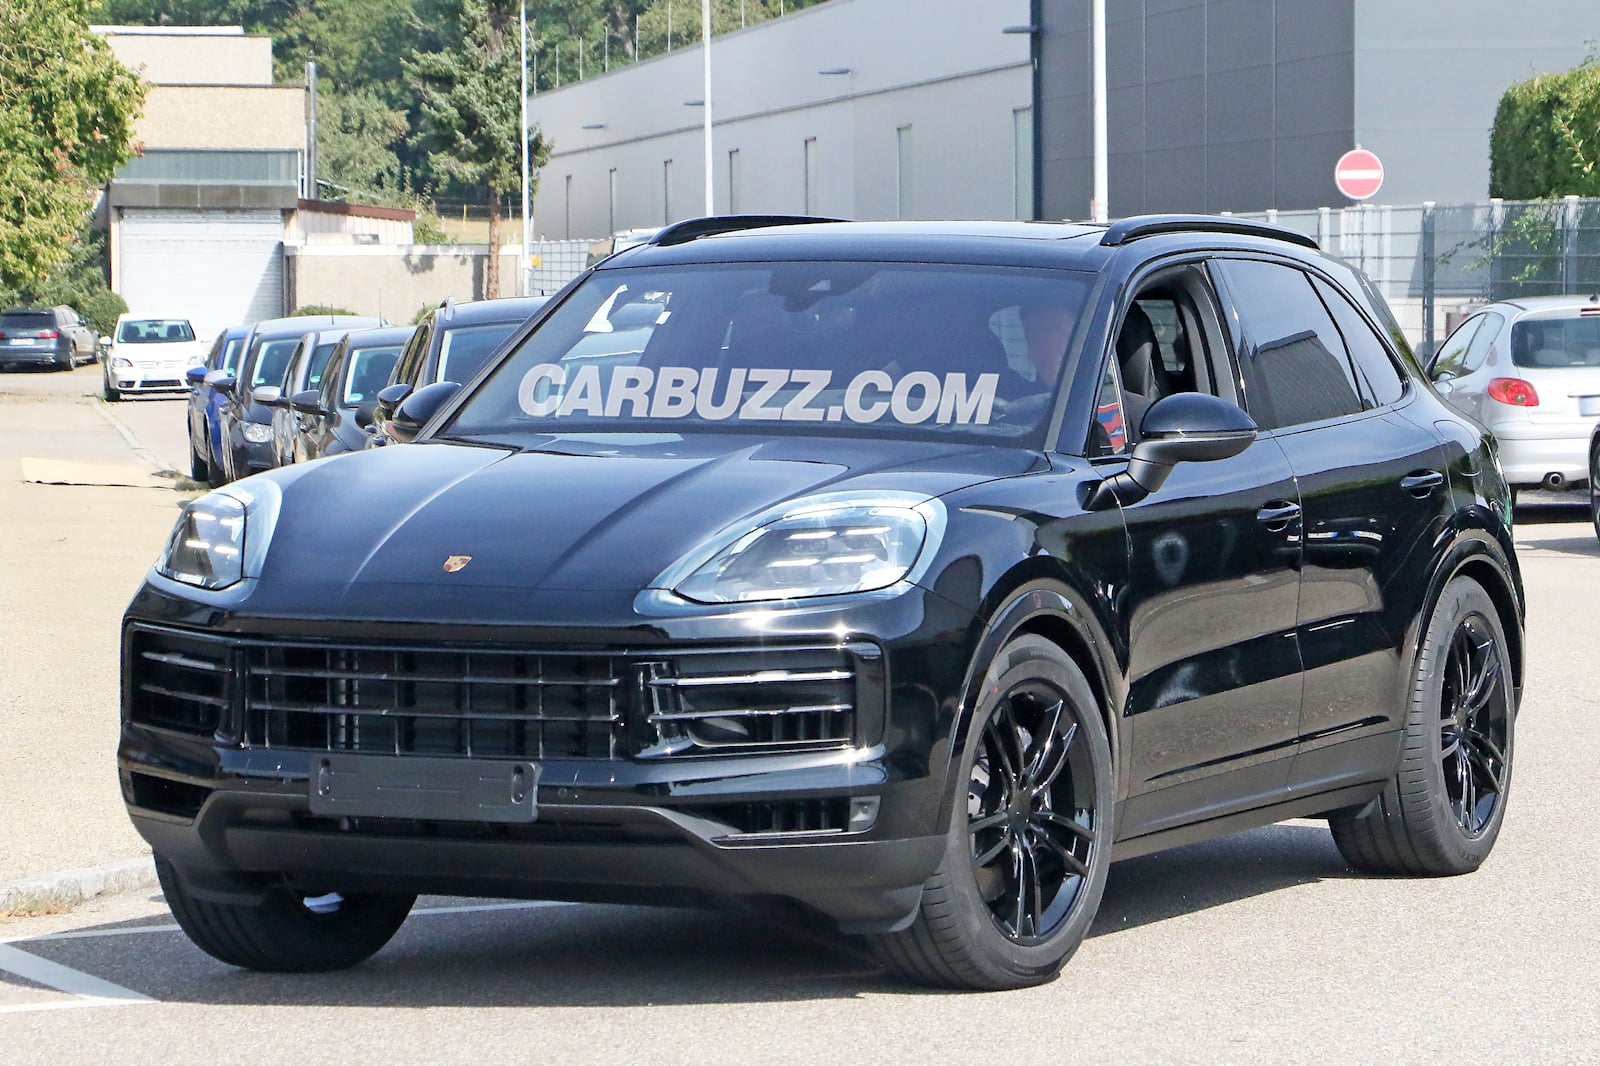 Porsche Cayenne Facelift Strips Down To Reveal Production Bumpers